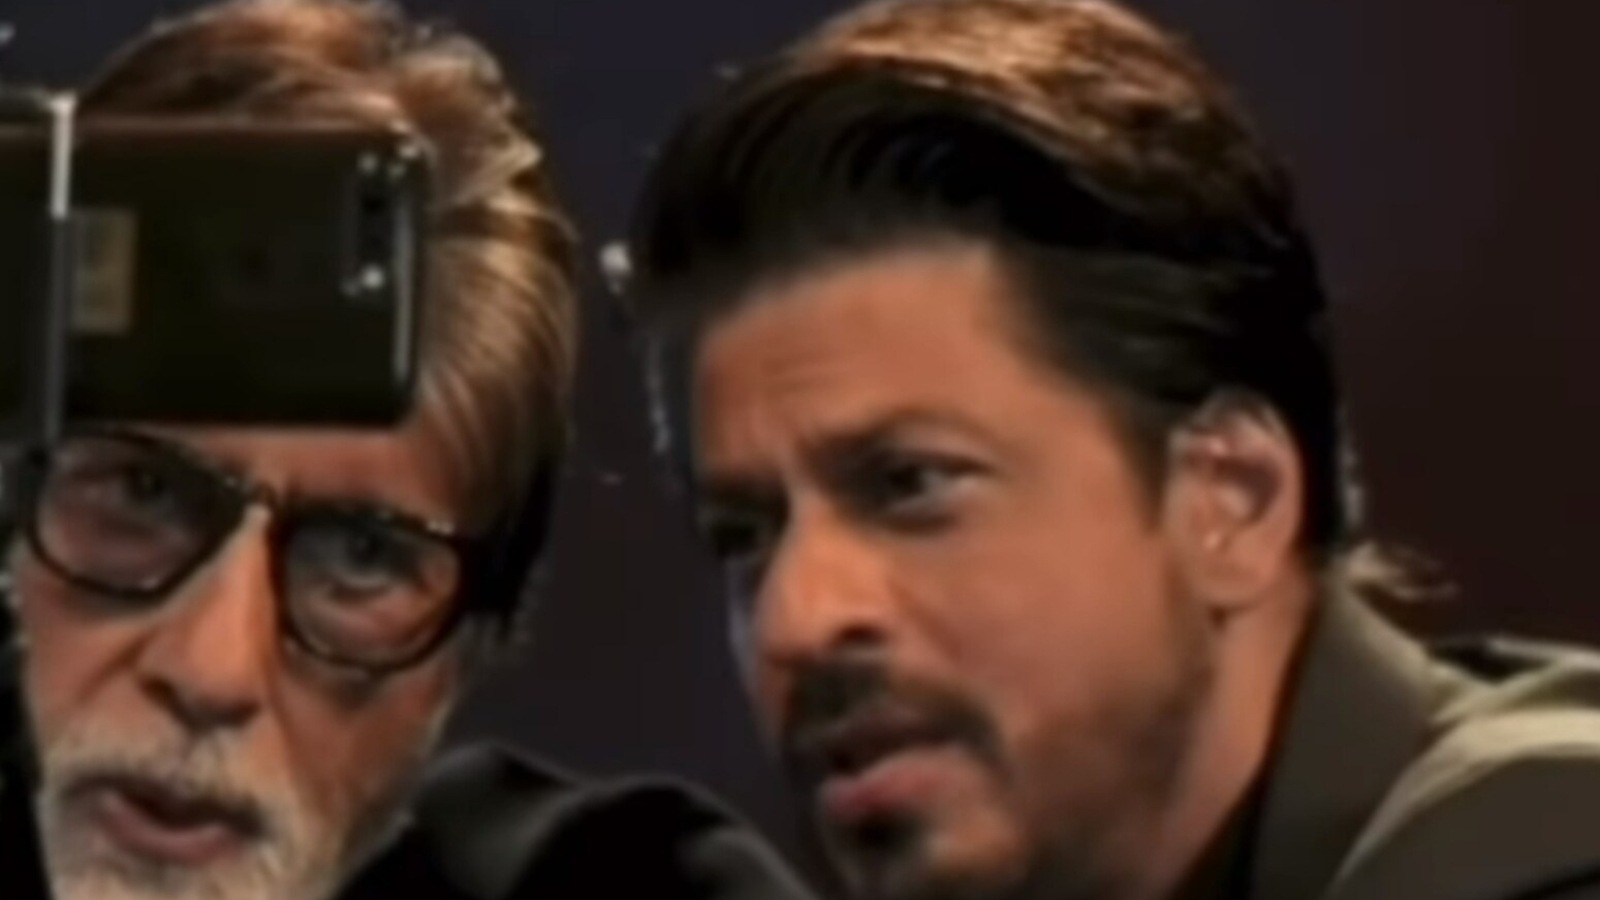 shah-rukh-khan-wishes-amitabh-bachchan-on-birthday-reveals-what-he-learnt-from-him